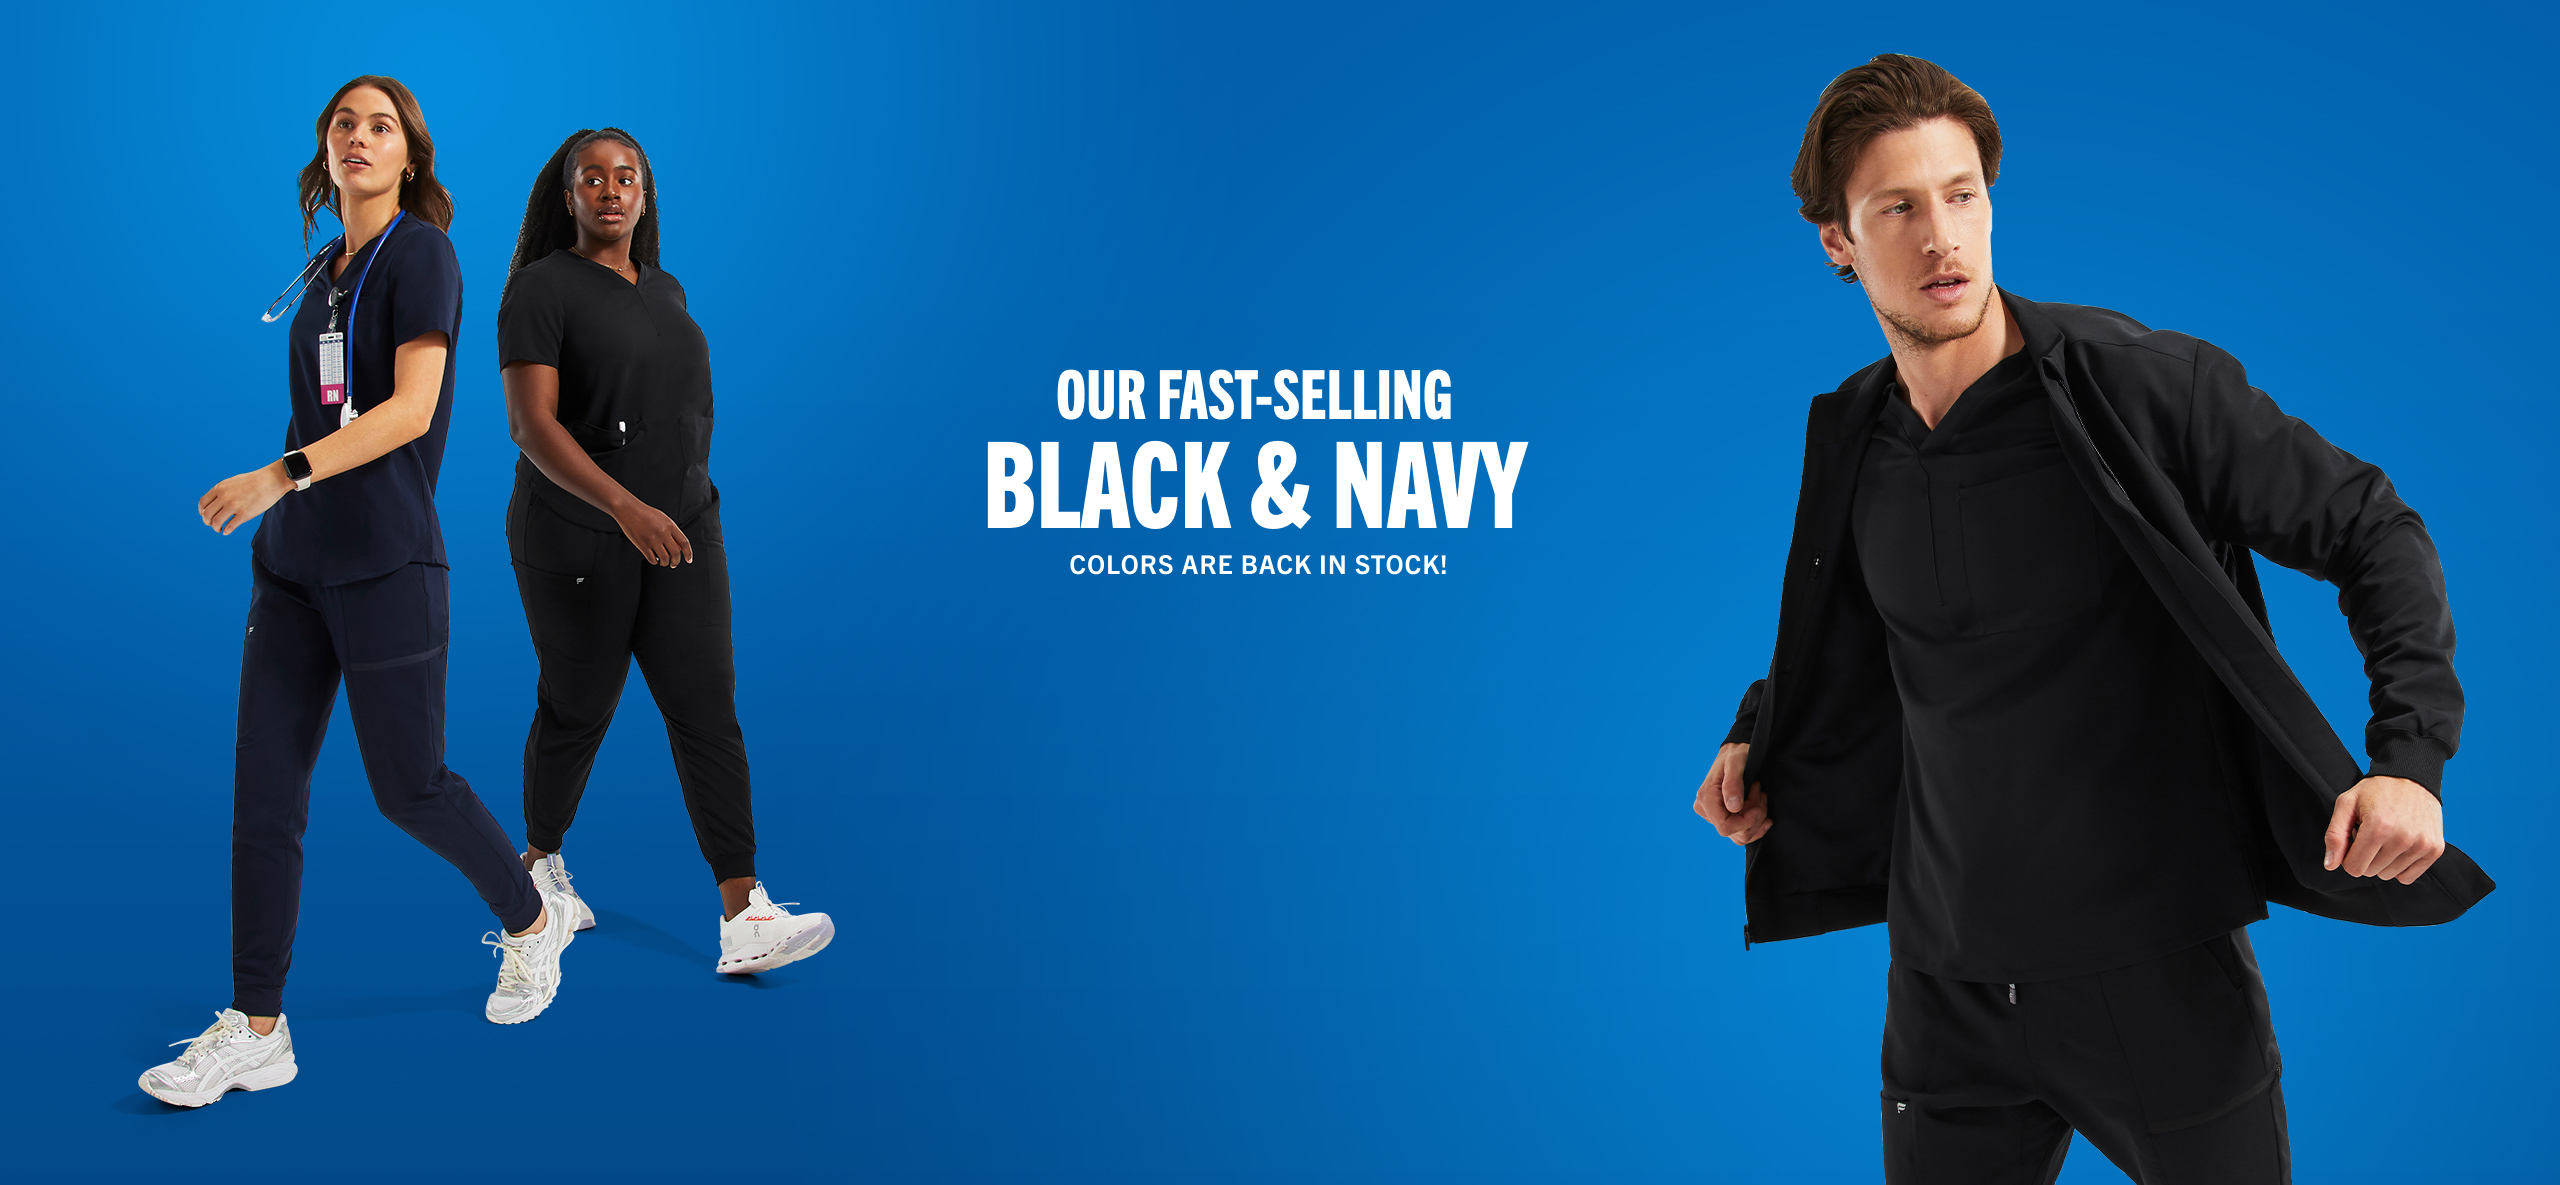 Our fast-selling black and navy colors are back in stock! Take the quiz to shop womens or shop mens